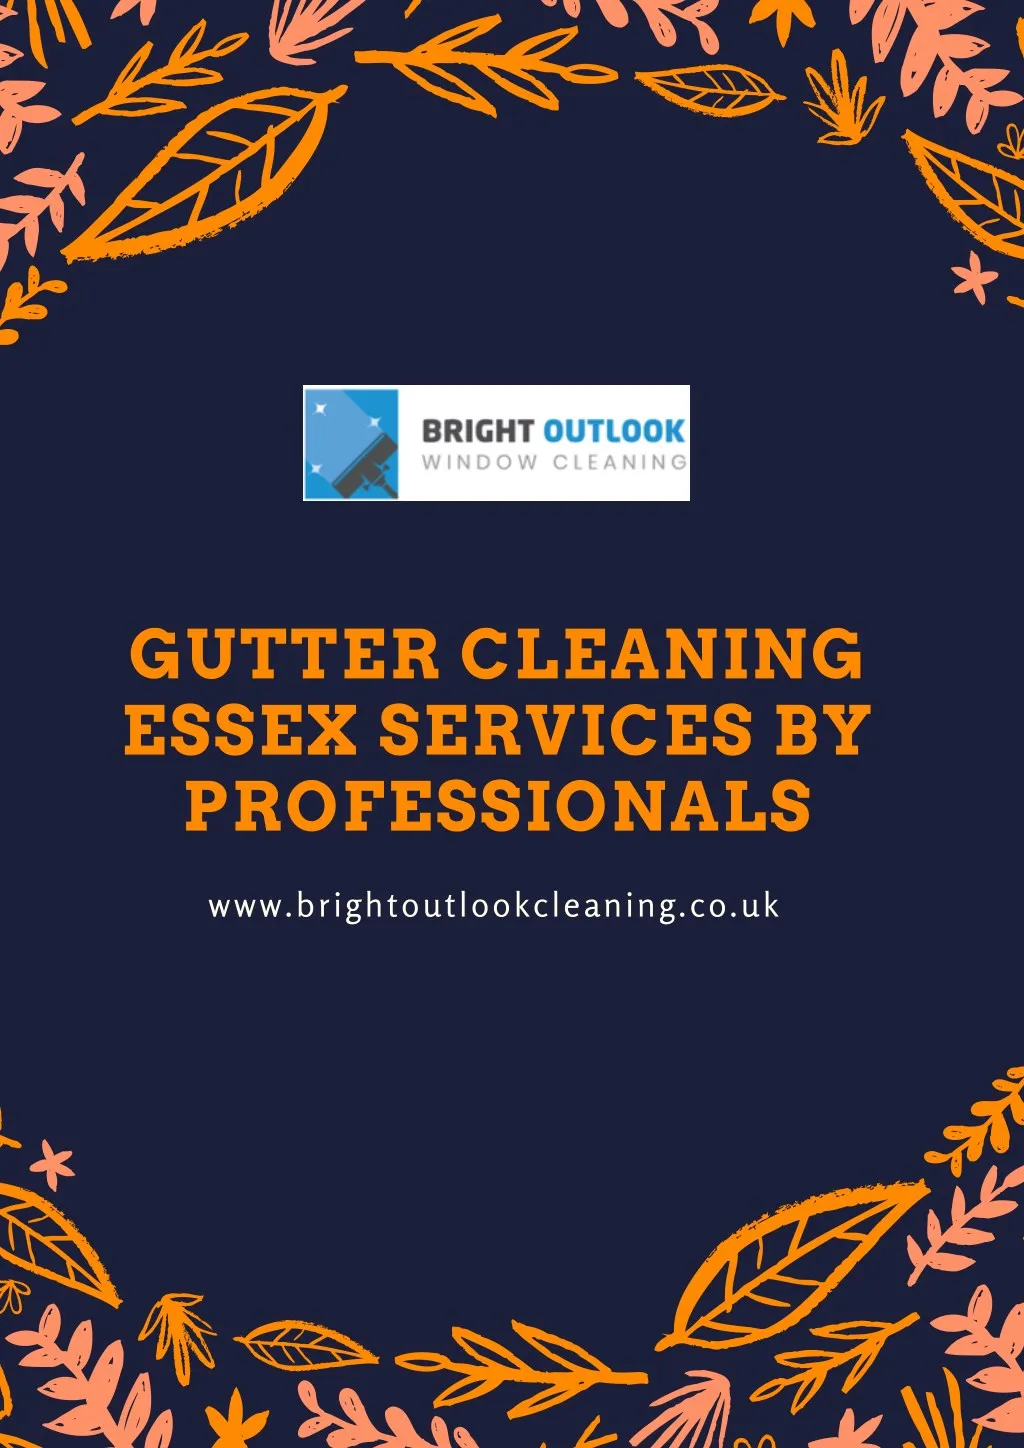 gutter cleaning essex services by professionals